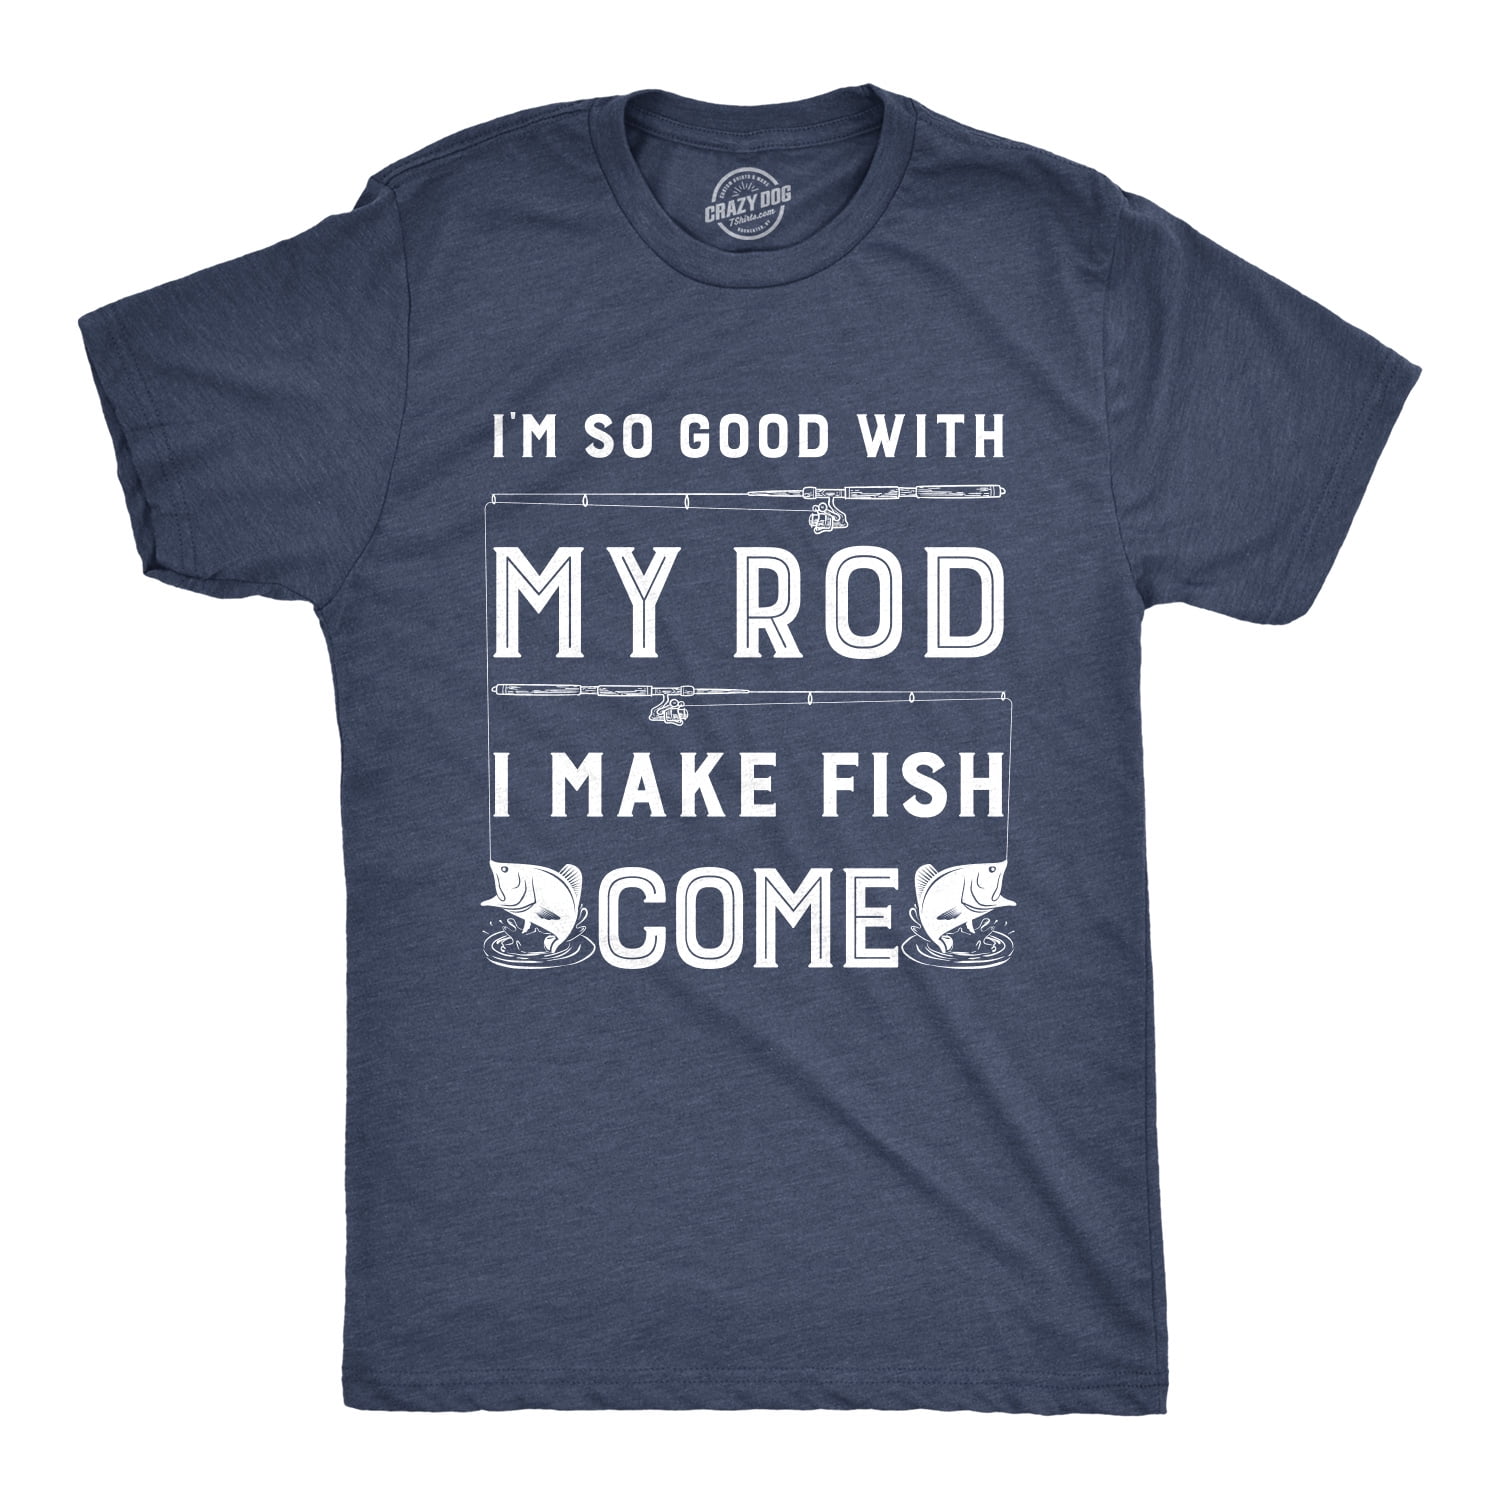 I Make Fish Come! Shirts So Good With My Rod..